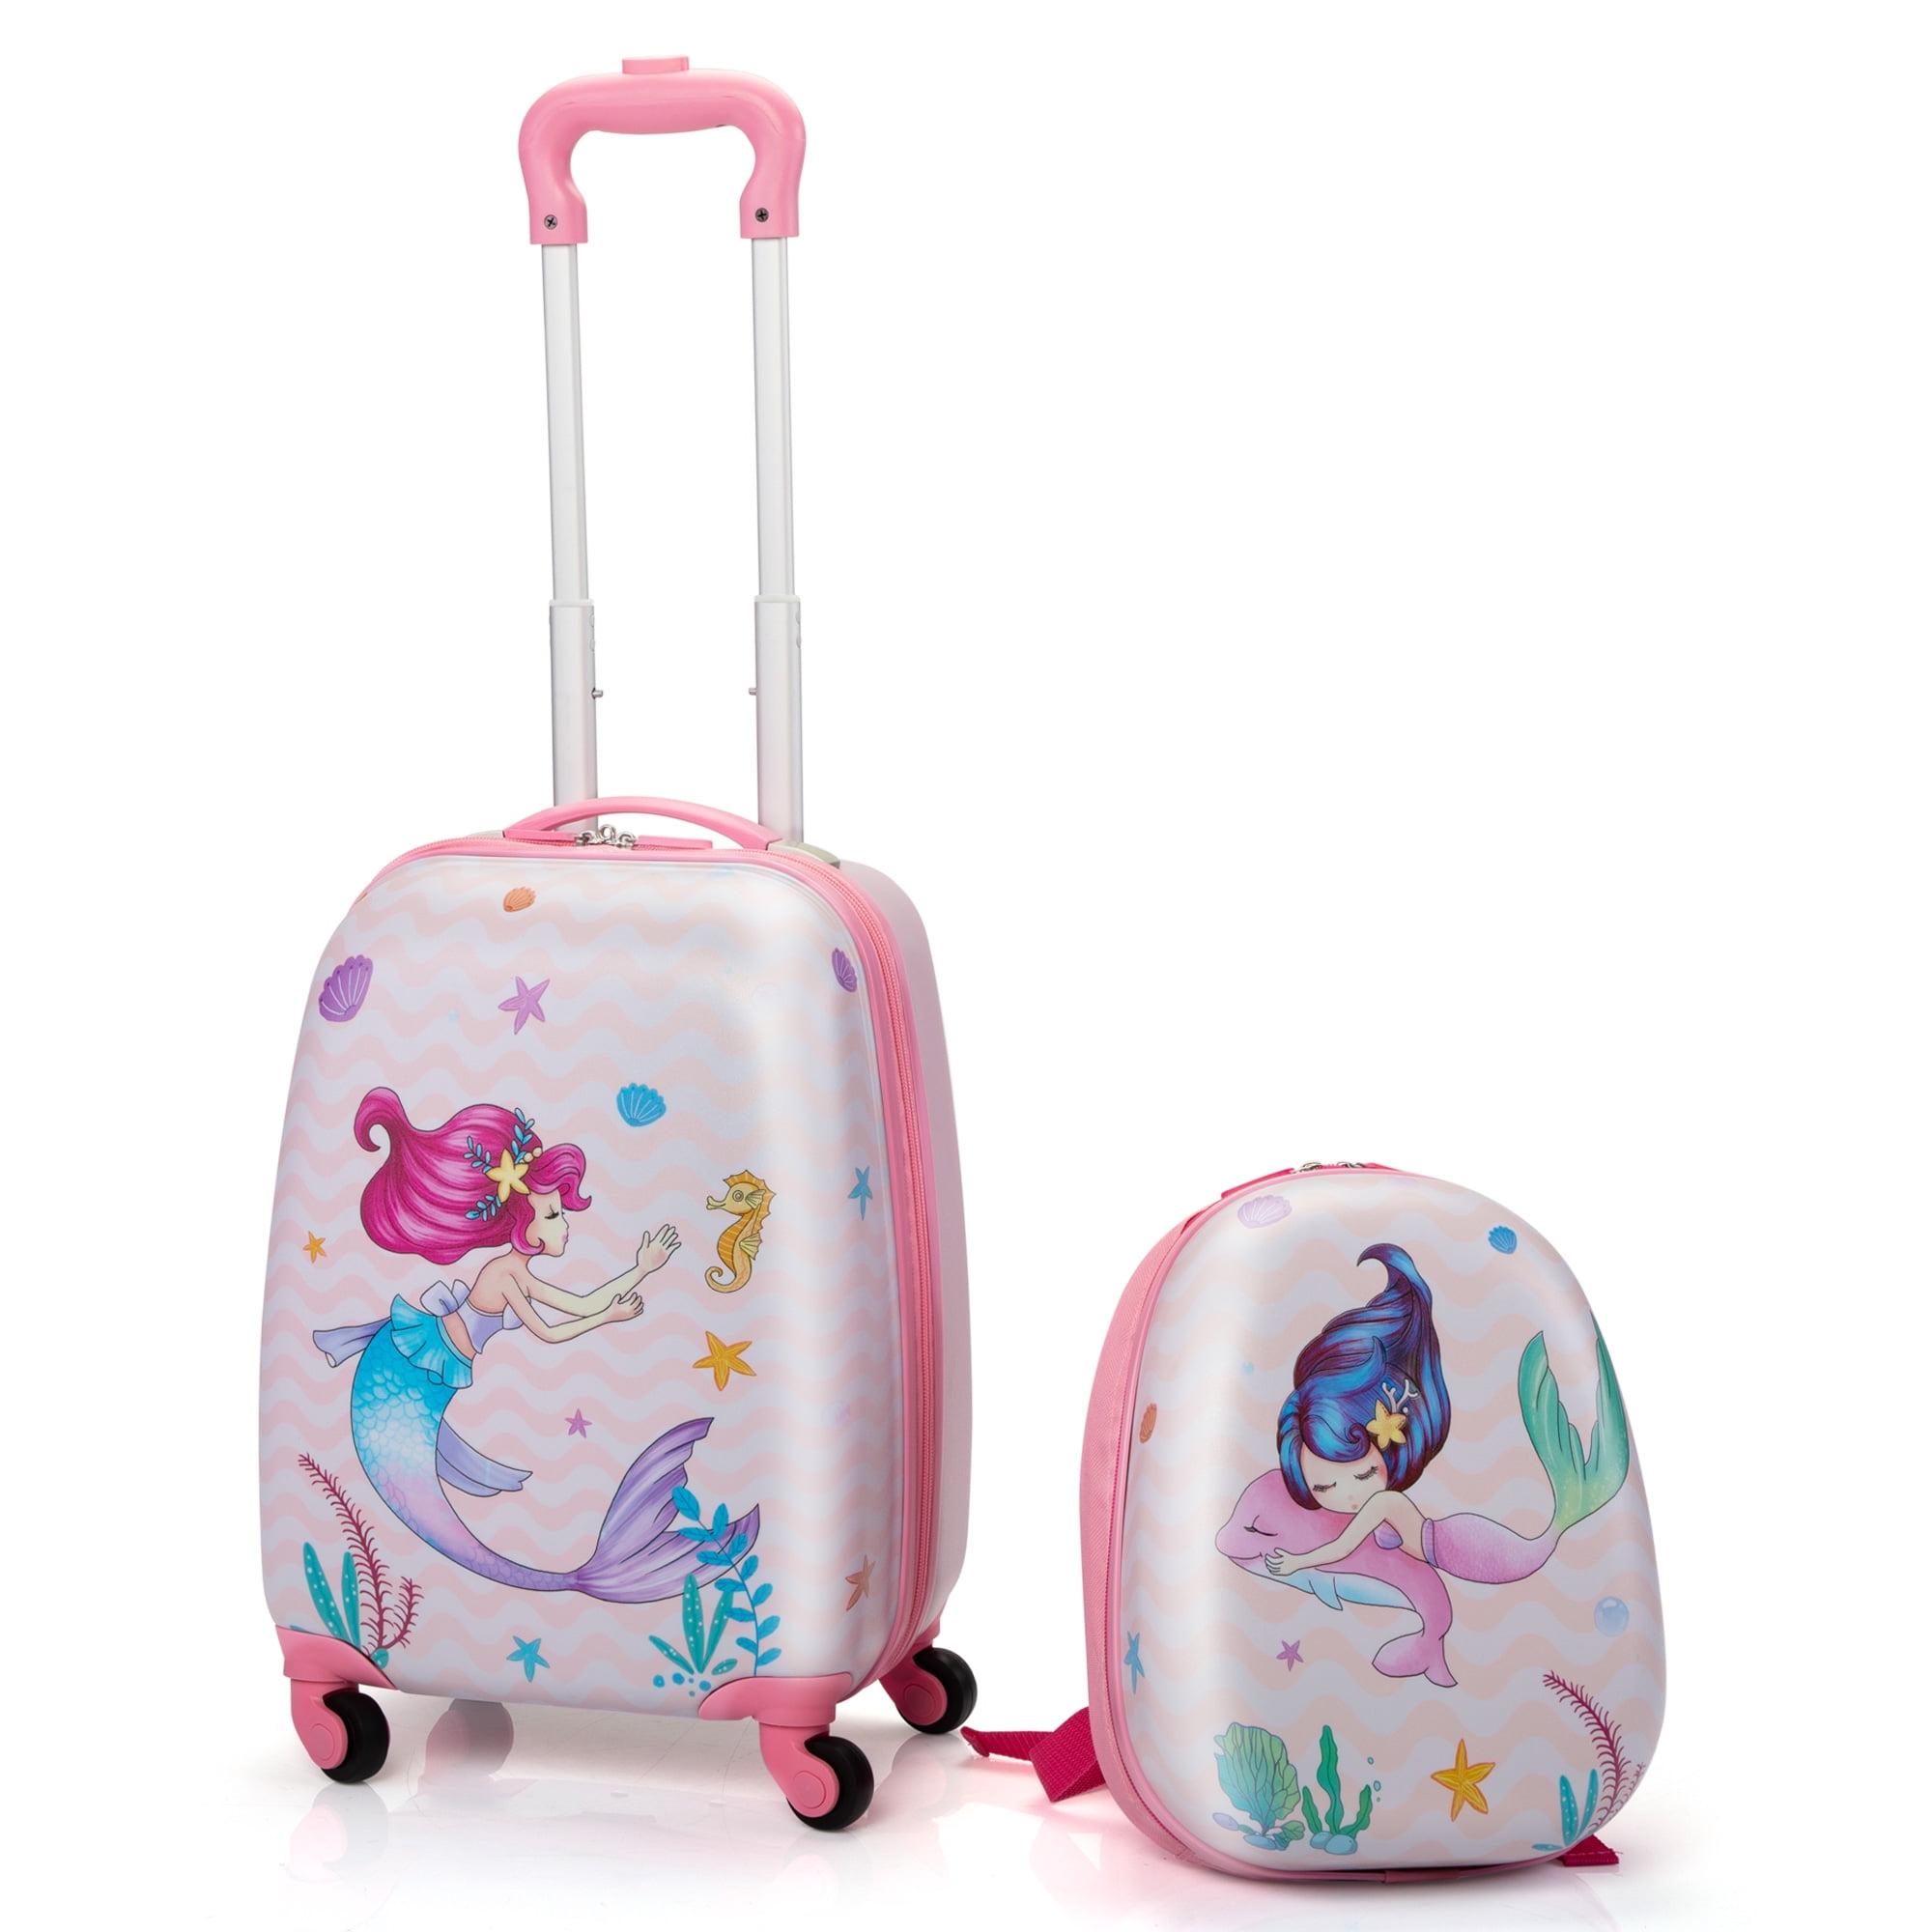 Jaxpety Kid Luggage w/Wheels for Girls, Toddler Rolling 16in Suitcase w/12in Backpack, Girl Travel Carry-On, Mermaid